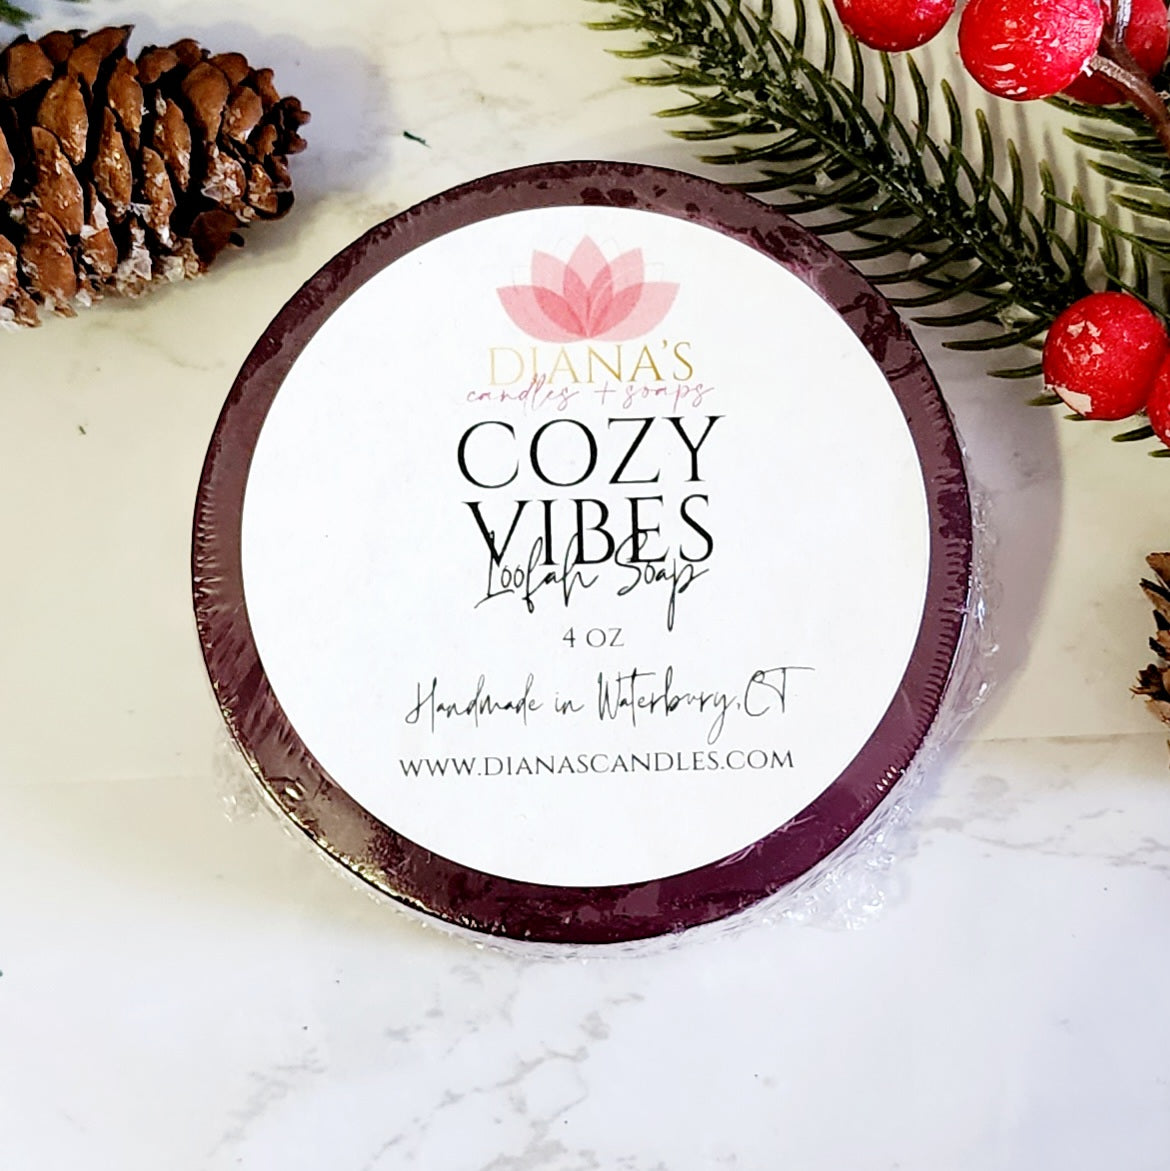 Cozy Vibes Loofah Soap Diana's Candles and Soaps 